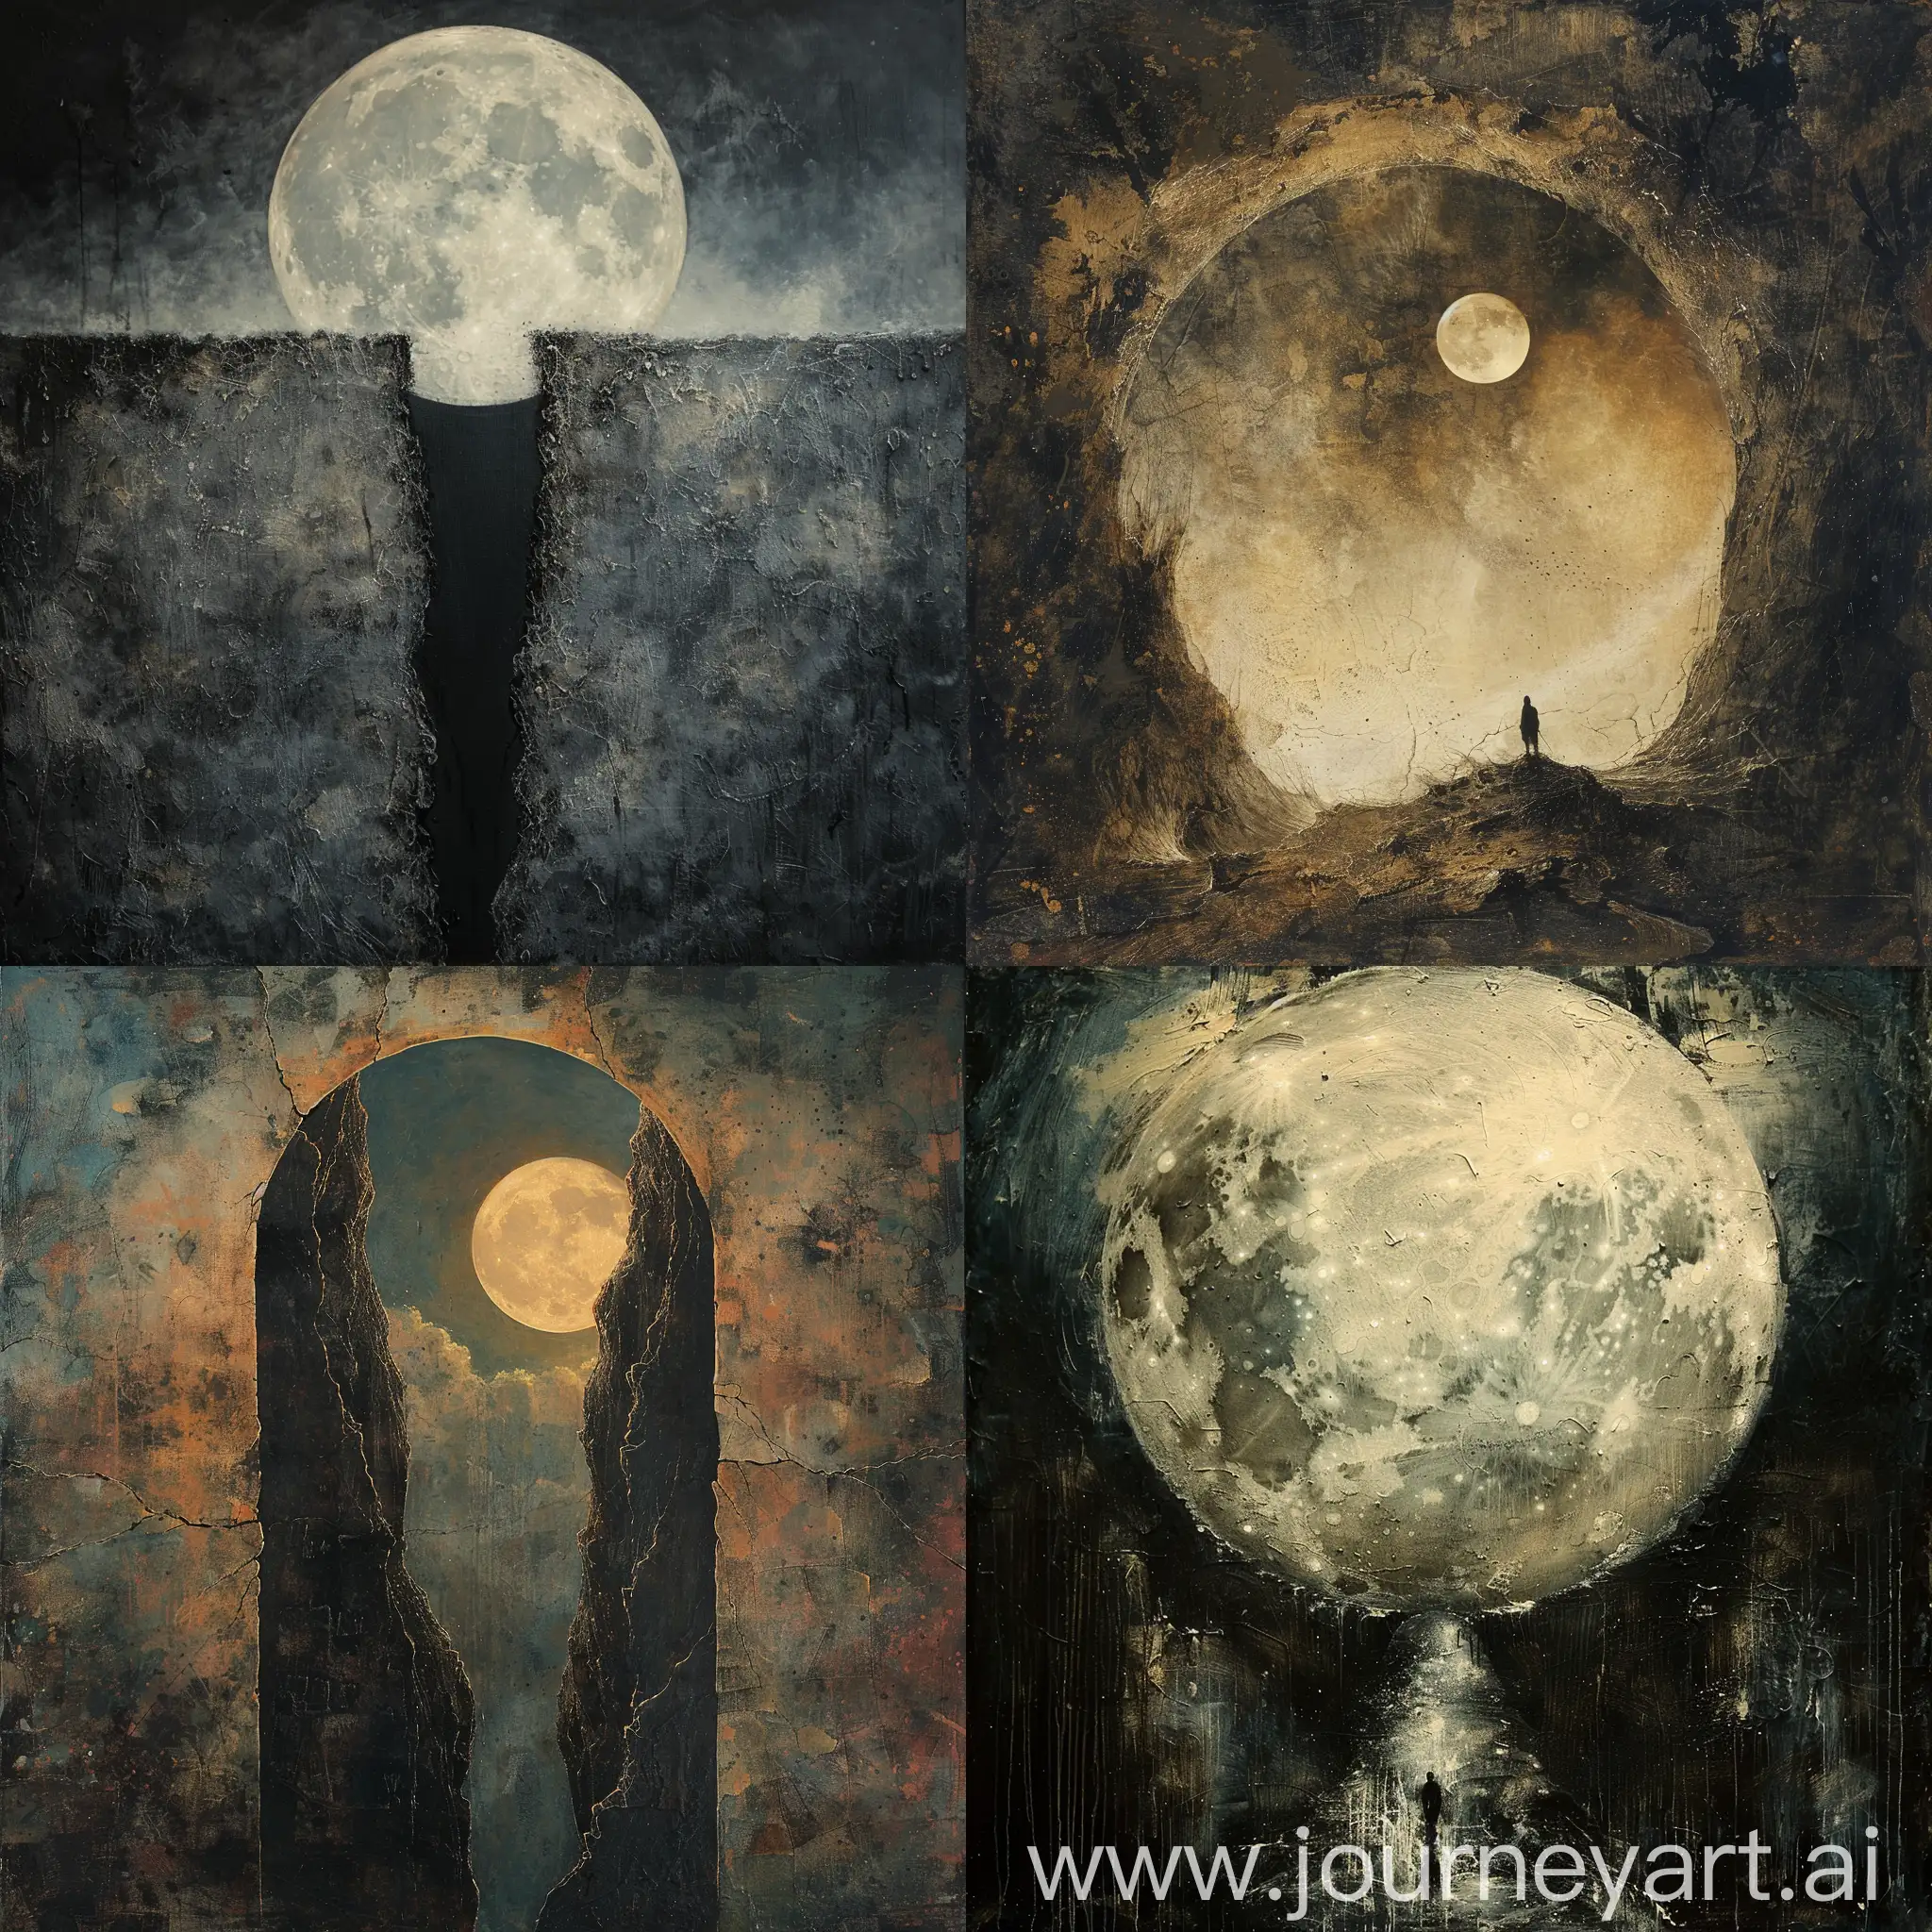 Moonlit-Dreamscape-with-Lonely-Souls